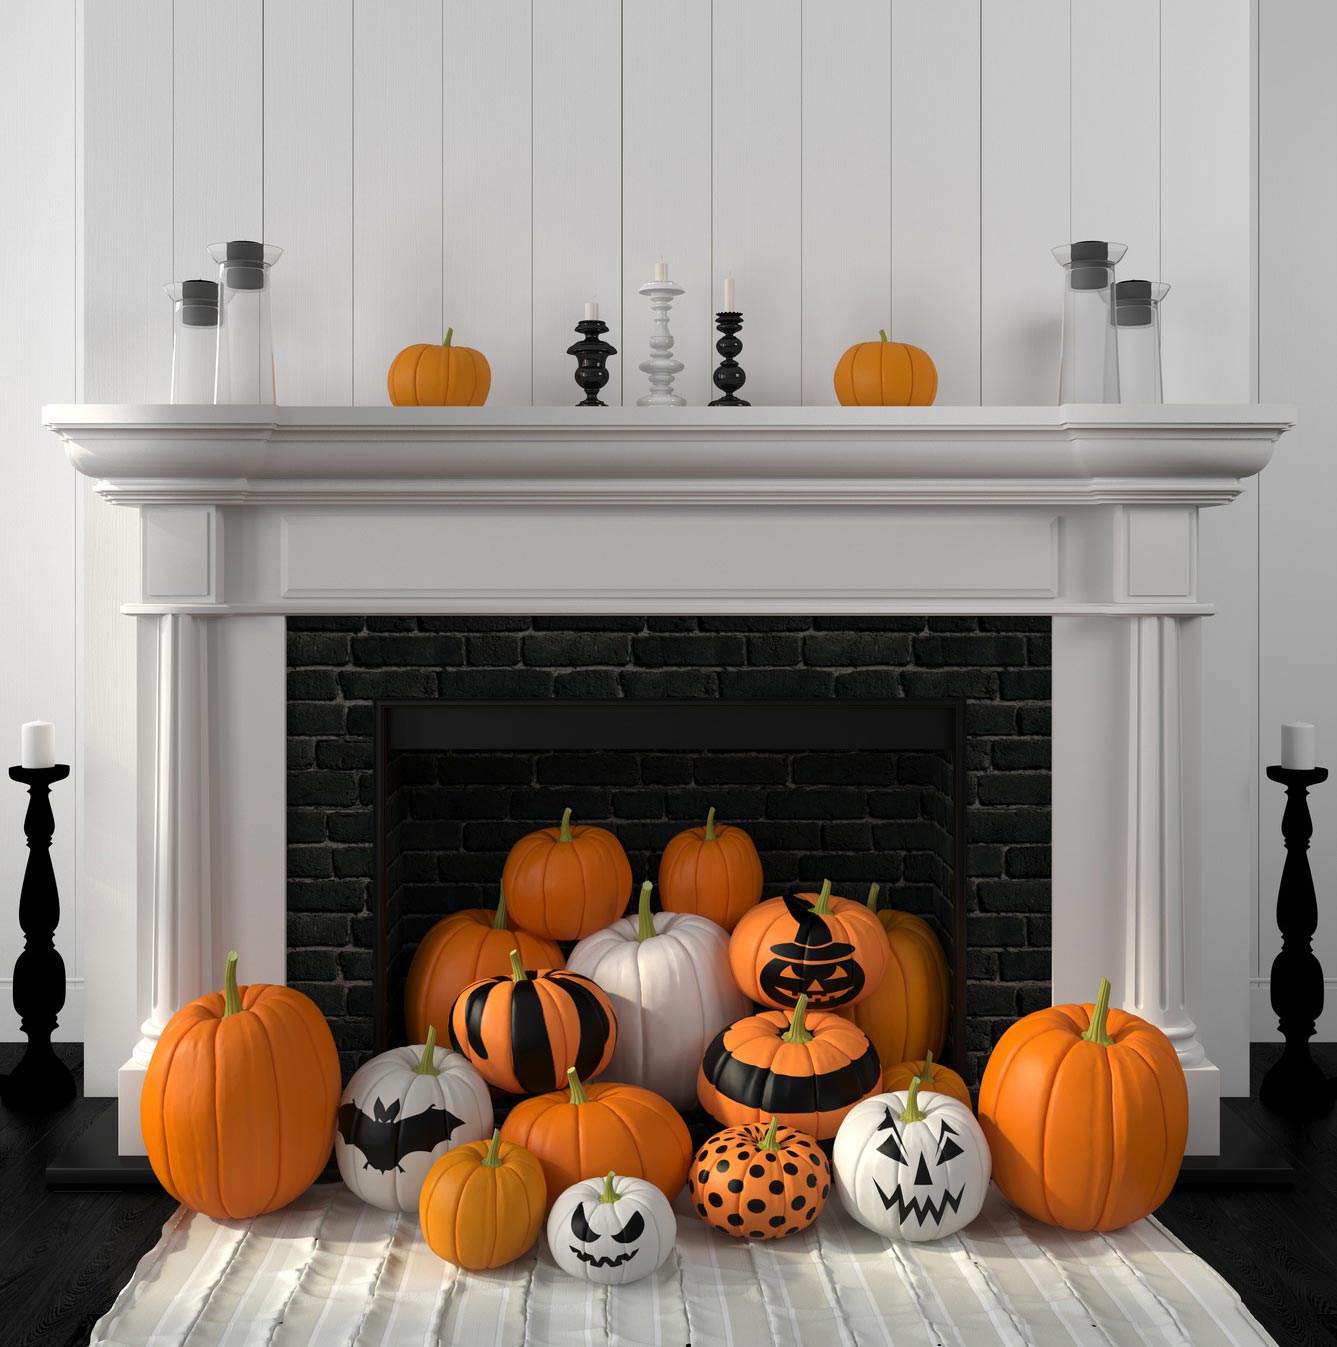 Fireplace with many colored pumpkins